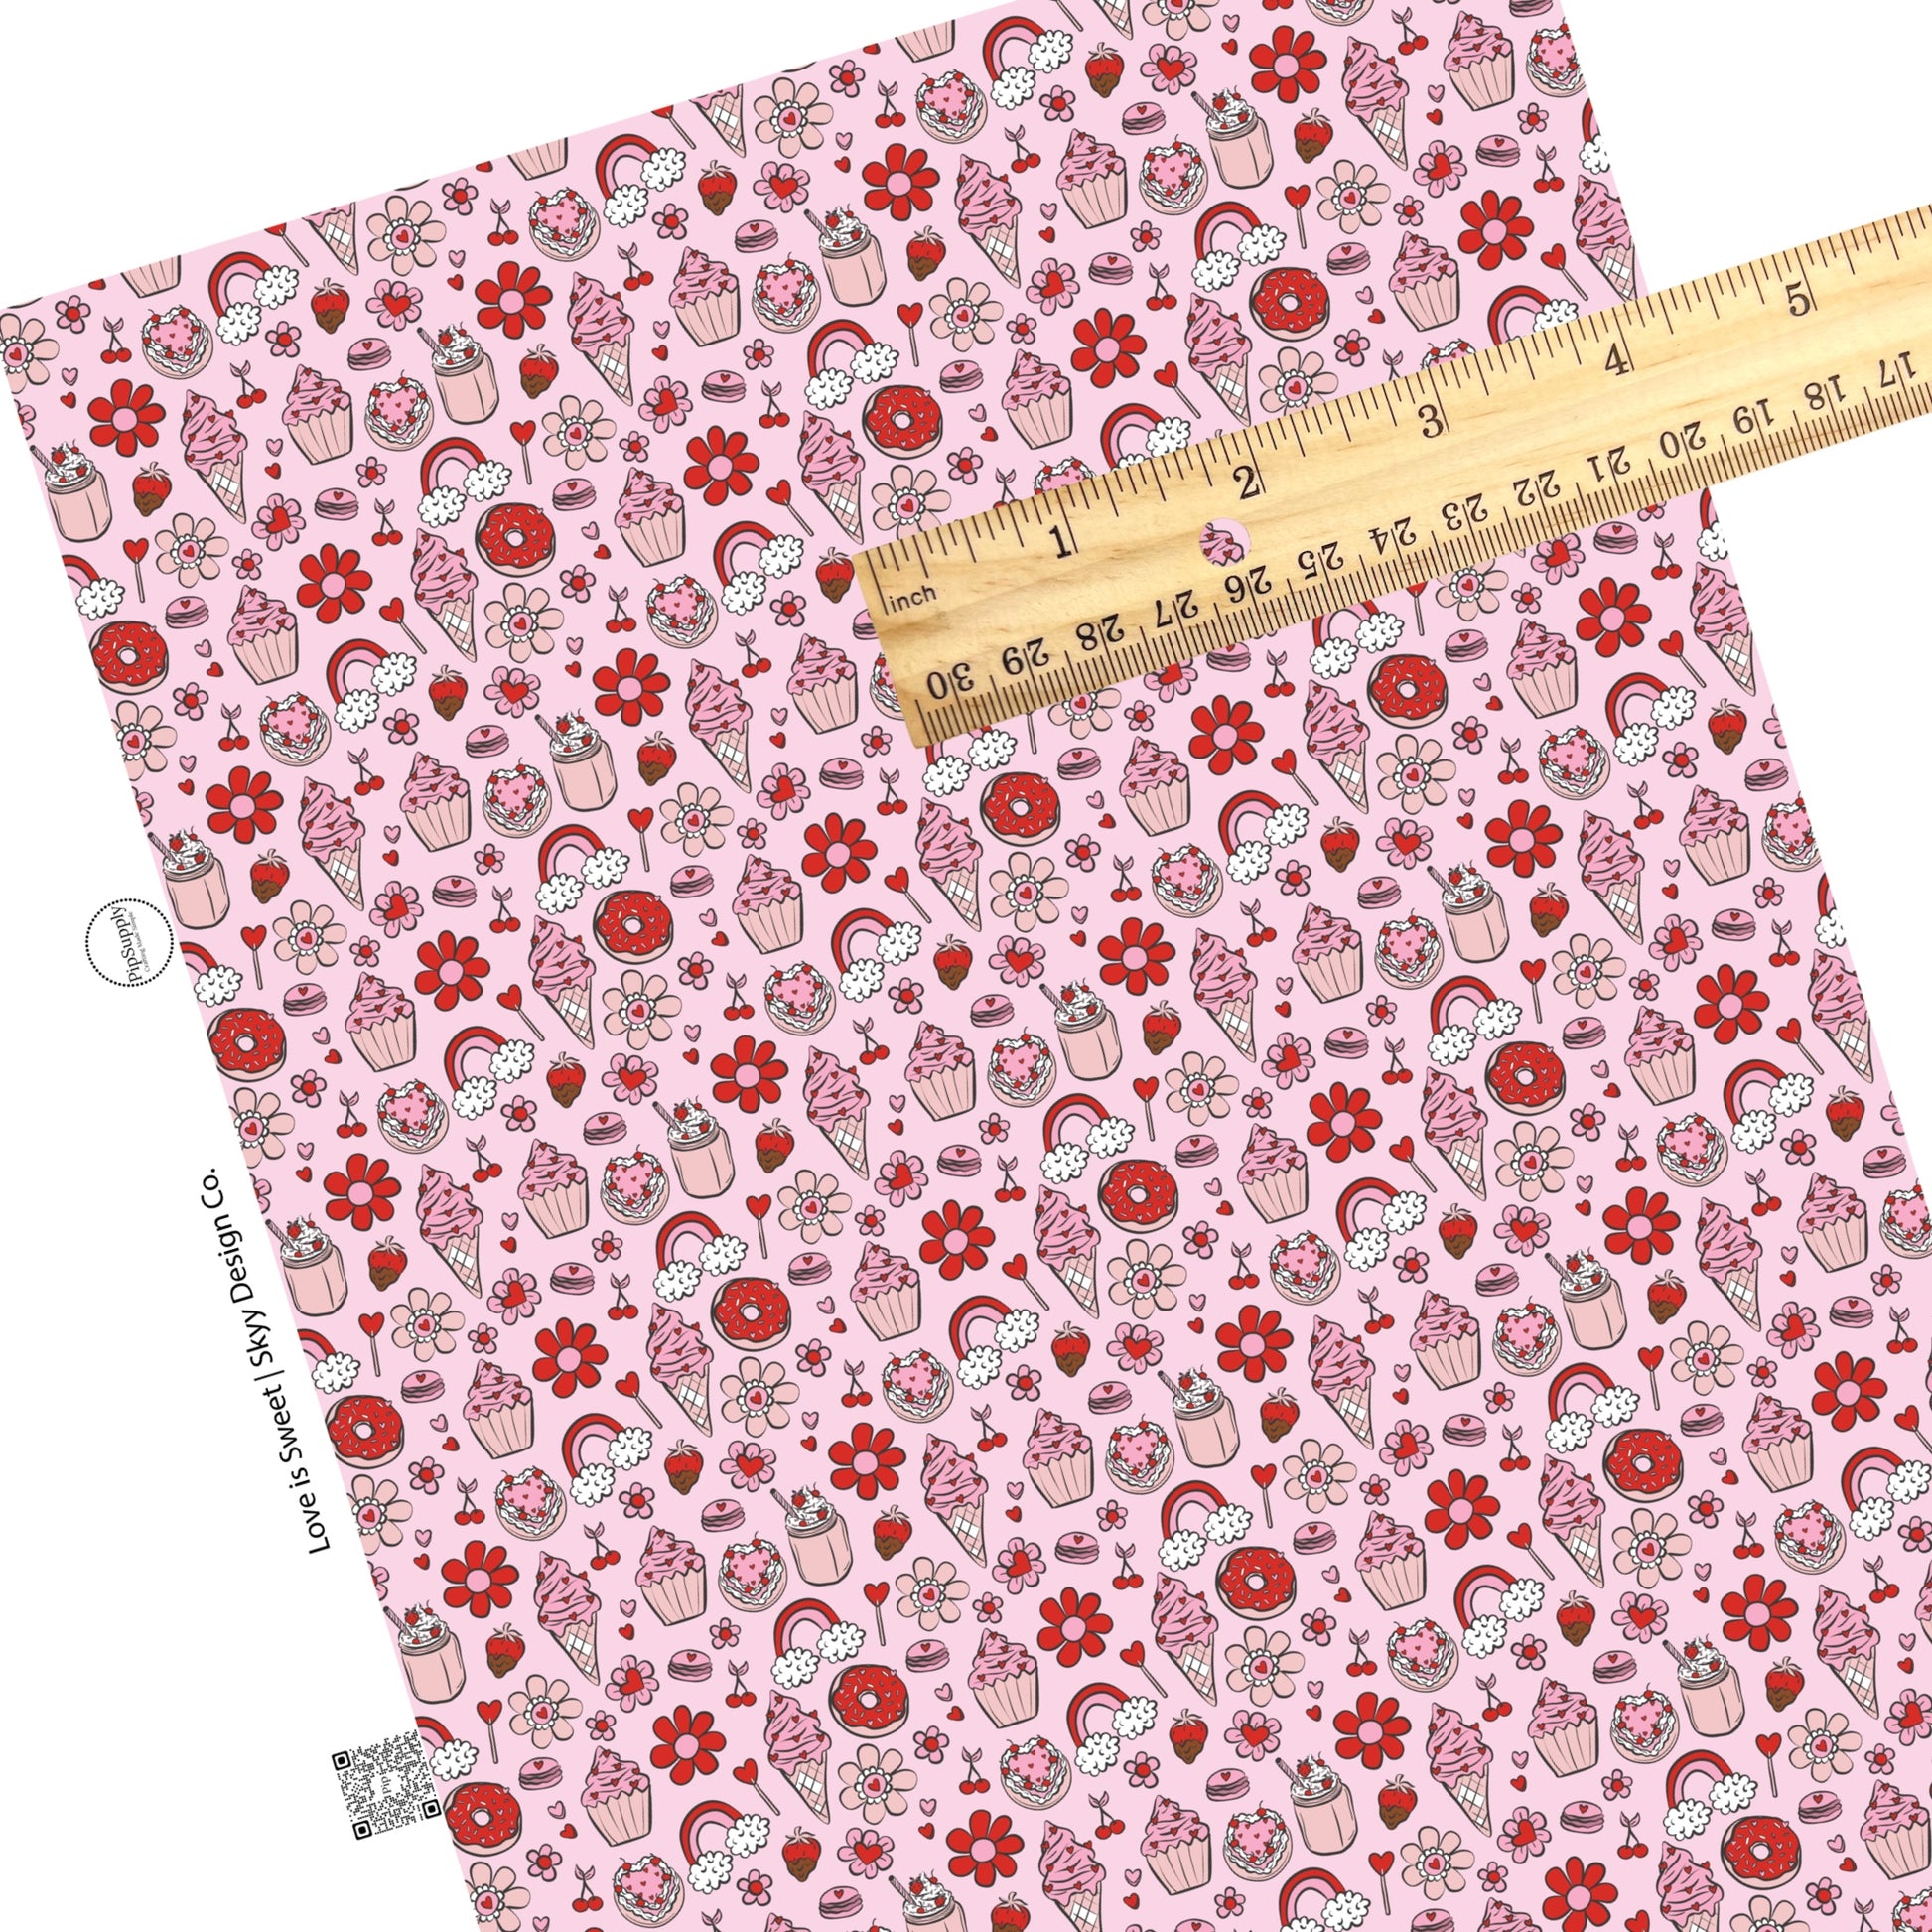 These Valentine's pattern themed faux leather sheets contain the following design elements: red and pink dessert treats, candy, flowers and rainbows on light pink. Our CPSIA compliant faux leather sheets or rolls can be used for all types of crafting projects.